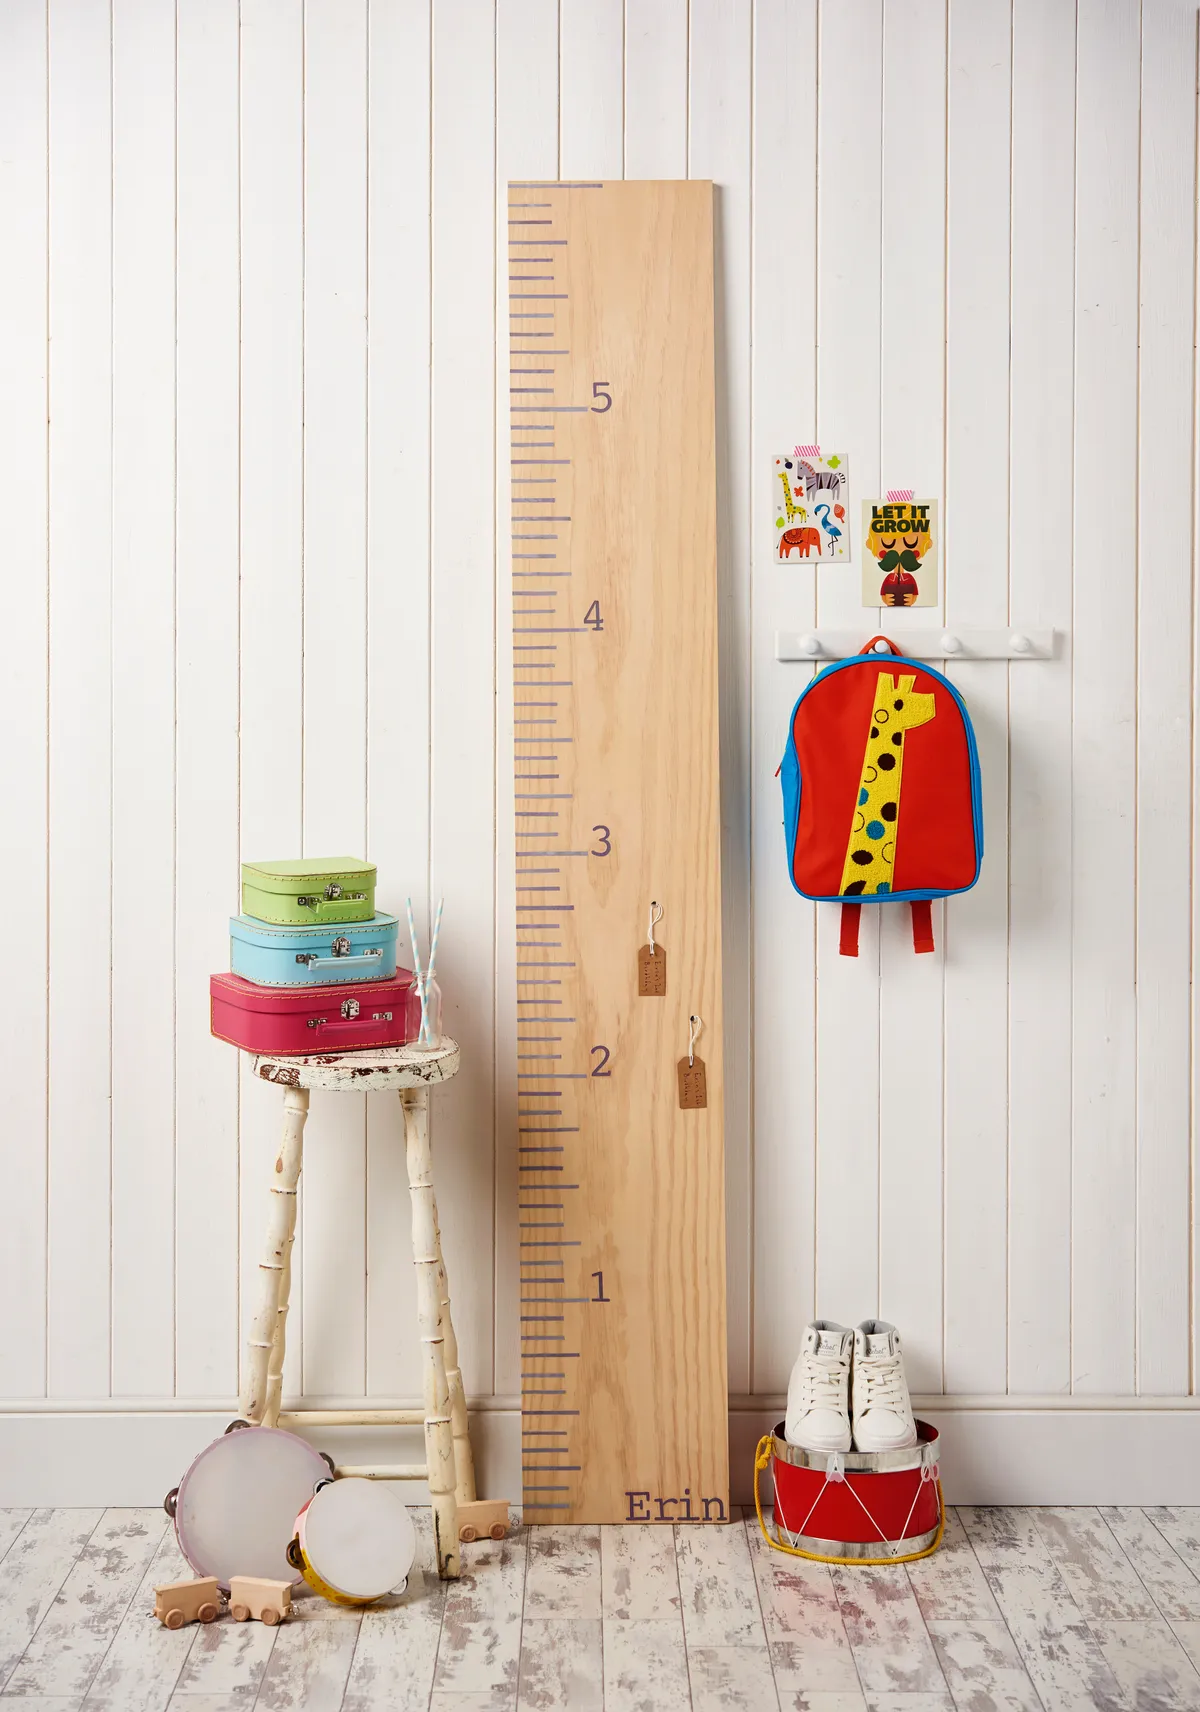 How to make a vintage height chart - upcycled wood project - full